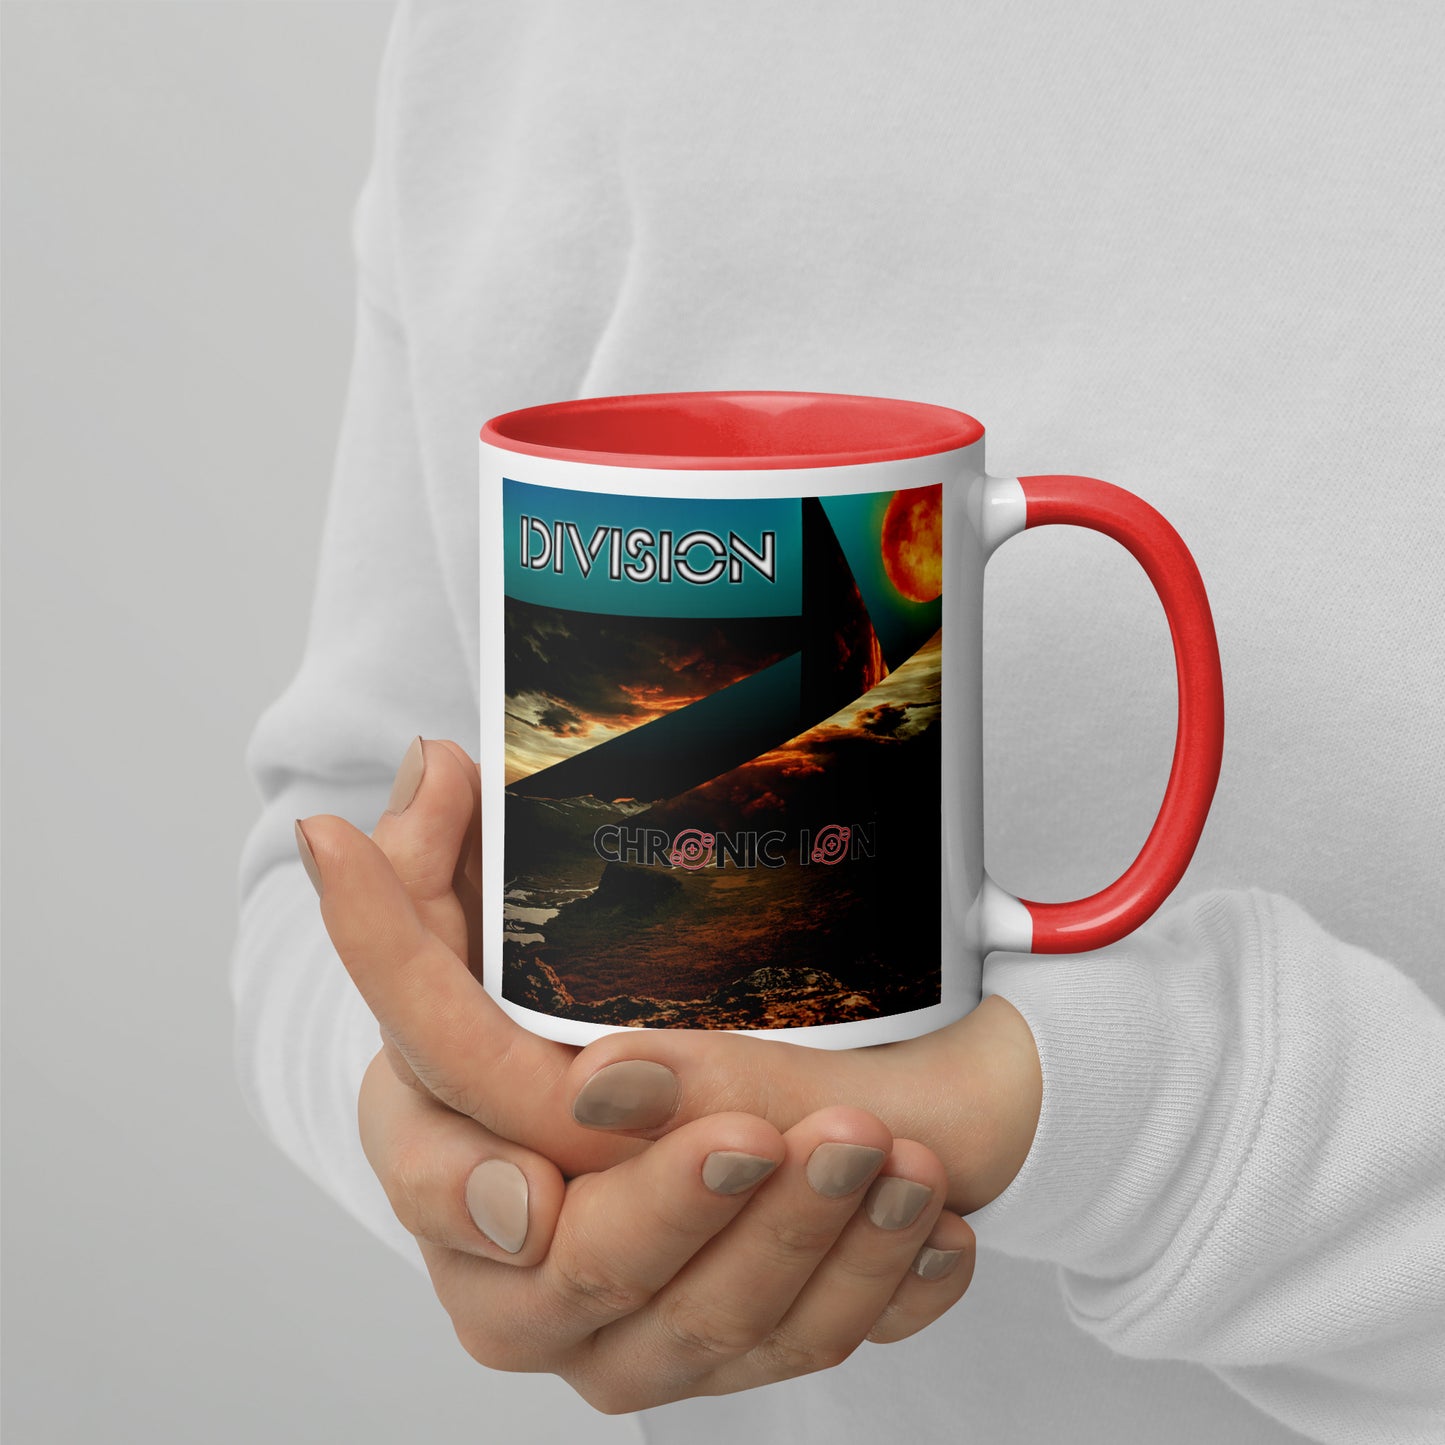 Chronic Ion - Division Mug With Color Inside